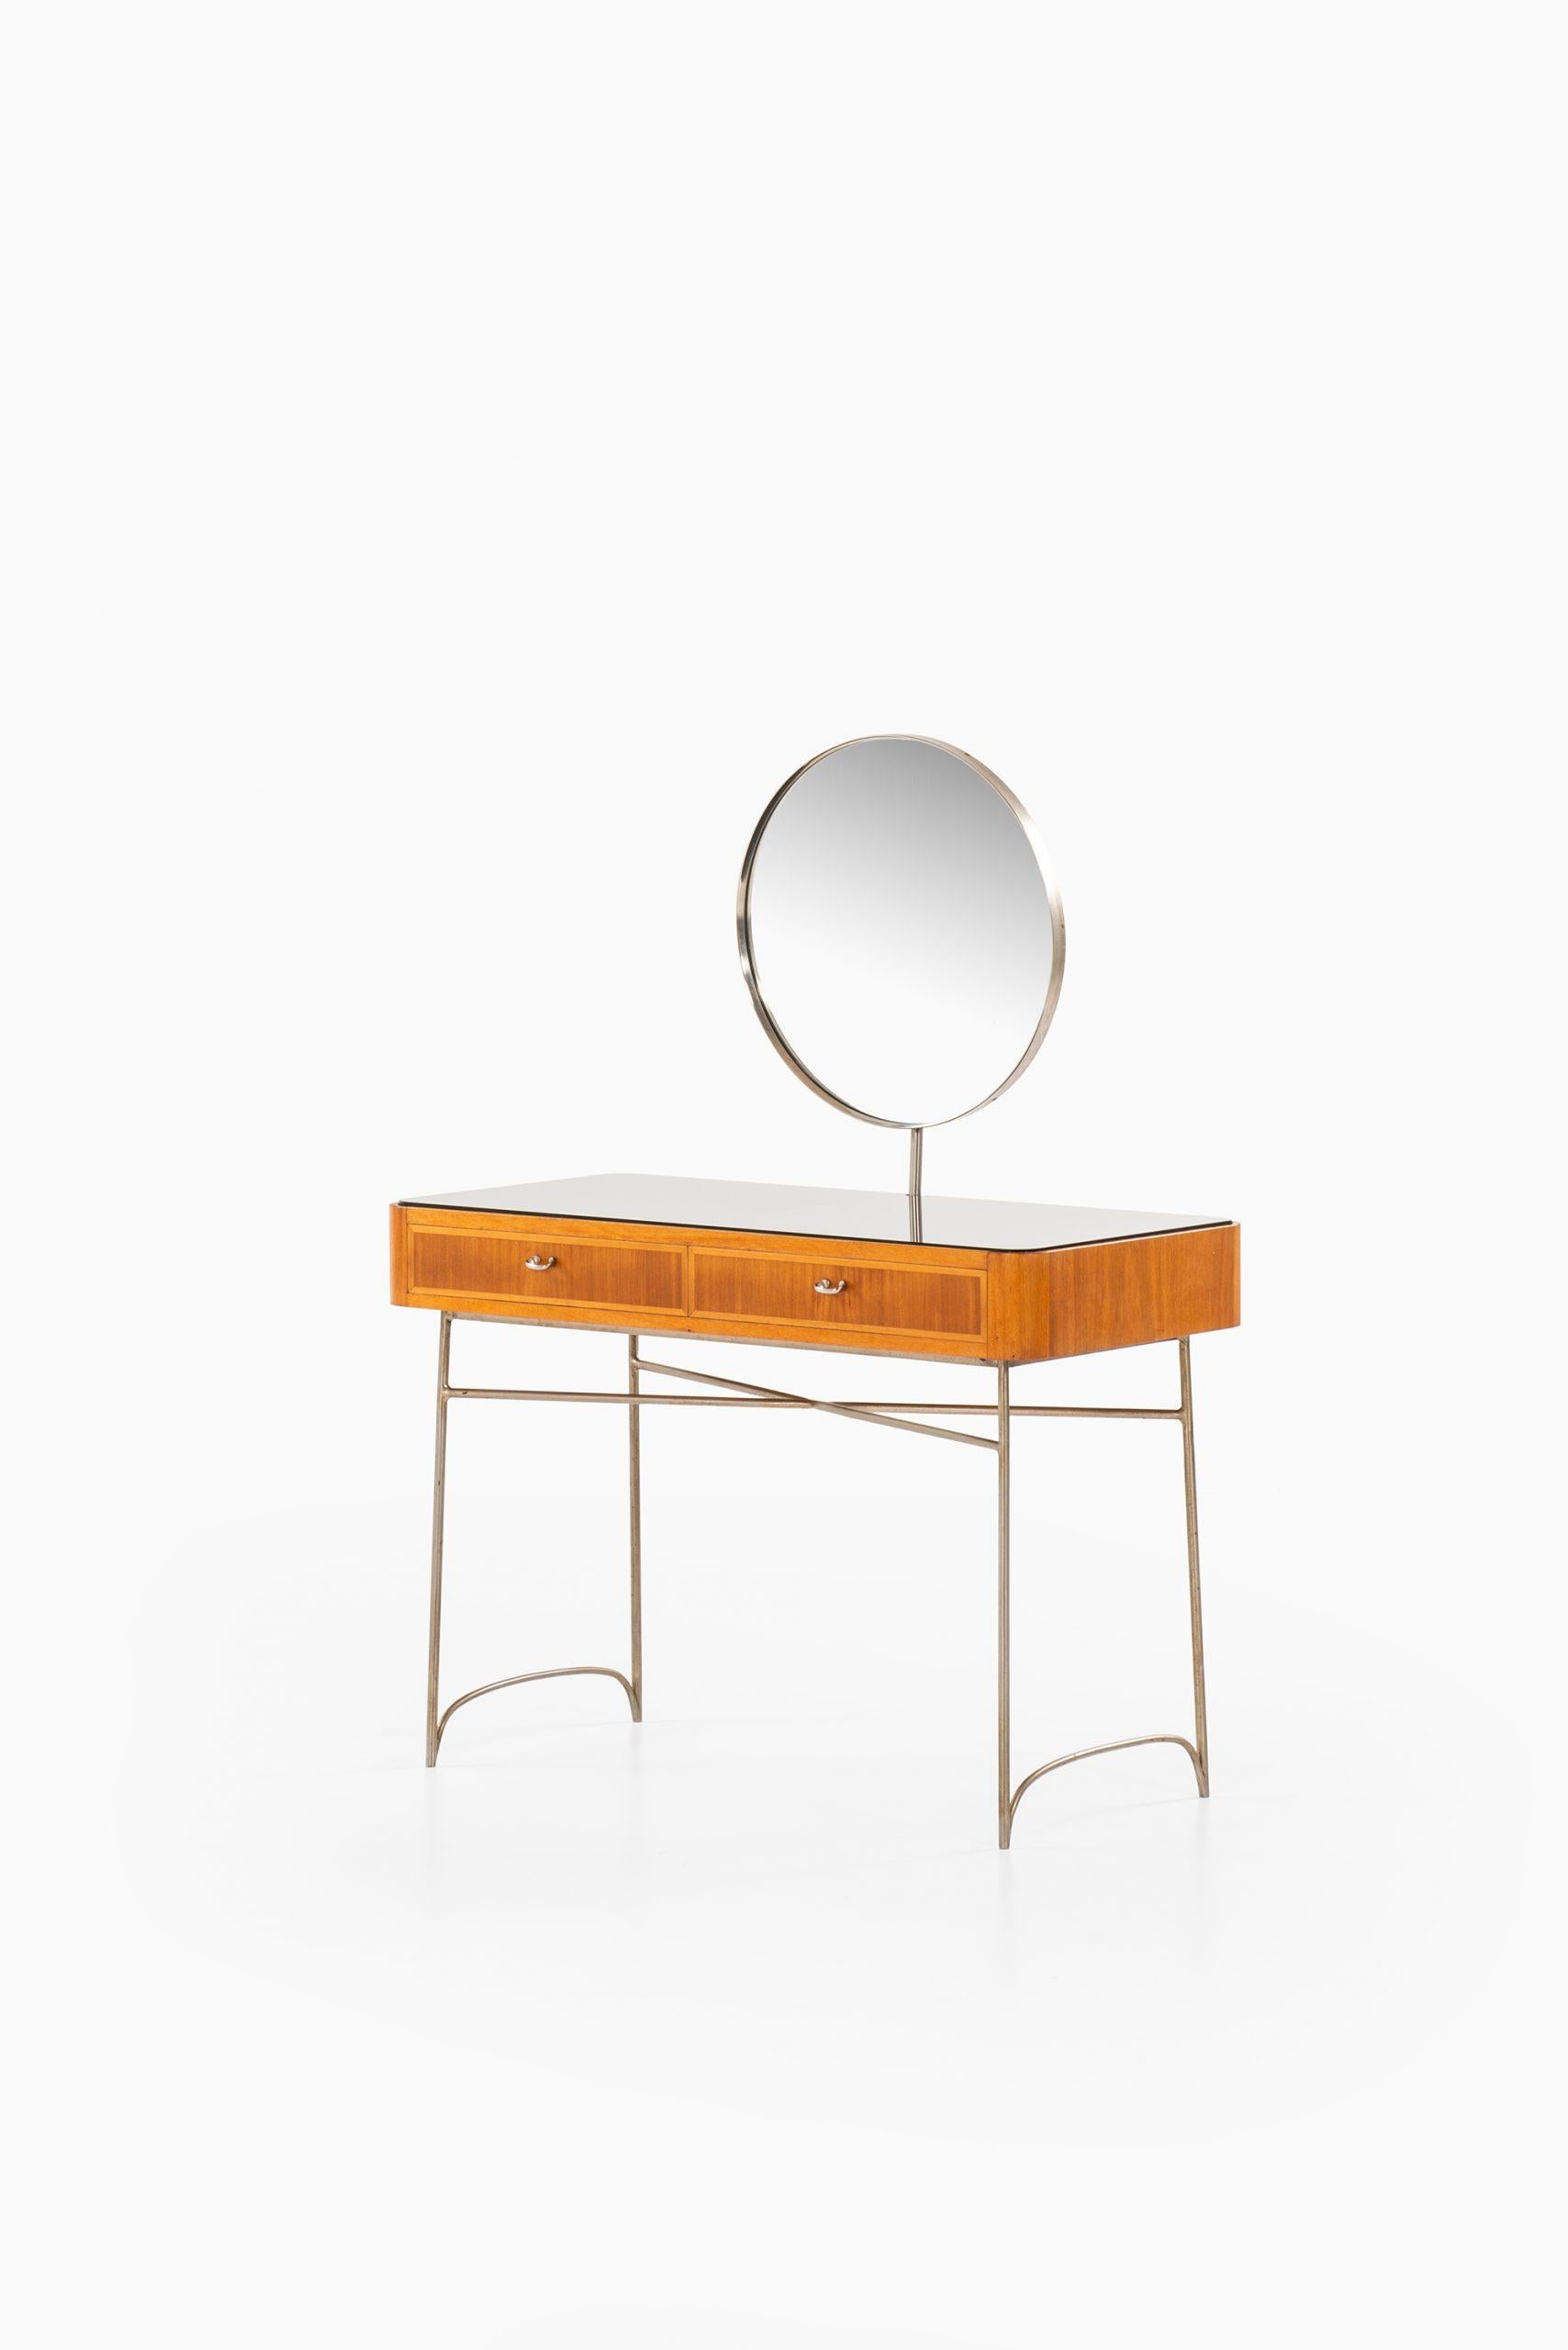 Danish Vanity Attributed to Frode Holm Produced by Illums Bolighus in Denmark For Sale